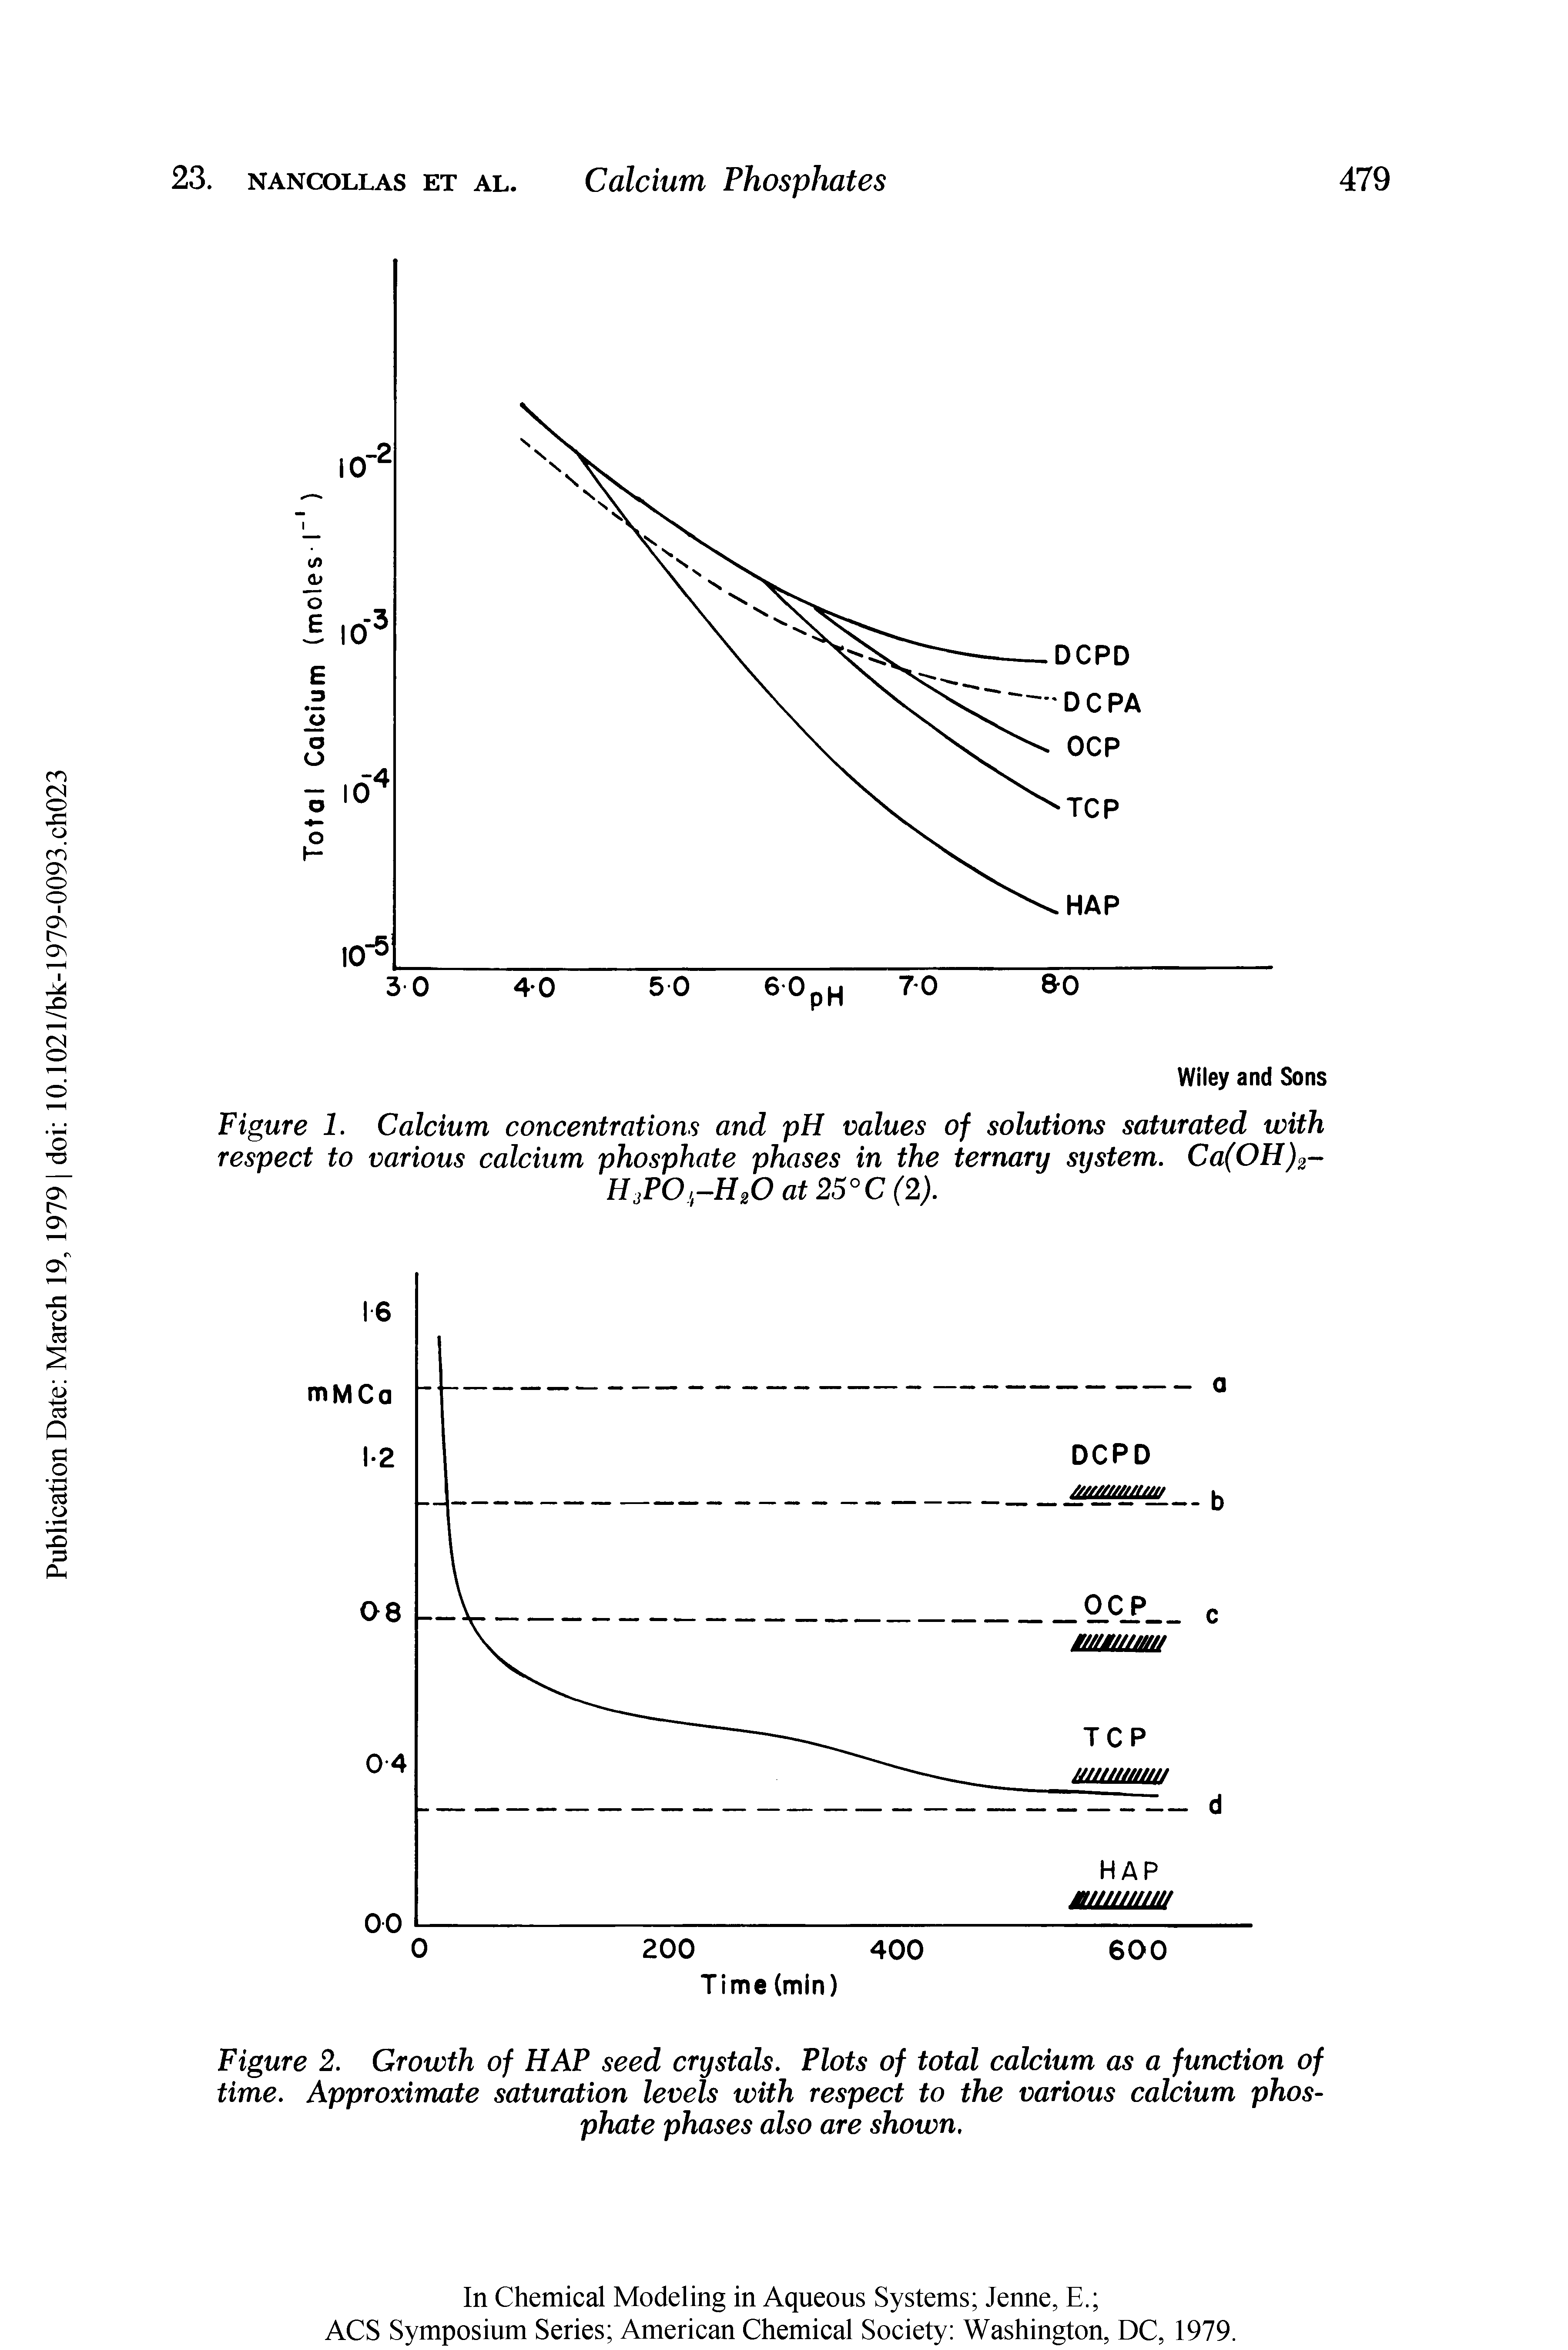 Figure 2. Growth of HAP seed crystals. Plots of total calcium as a function of time. Approximate saturation levels with respect to the various calcium phosphate phases also are shown.